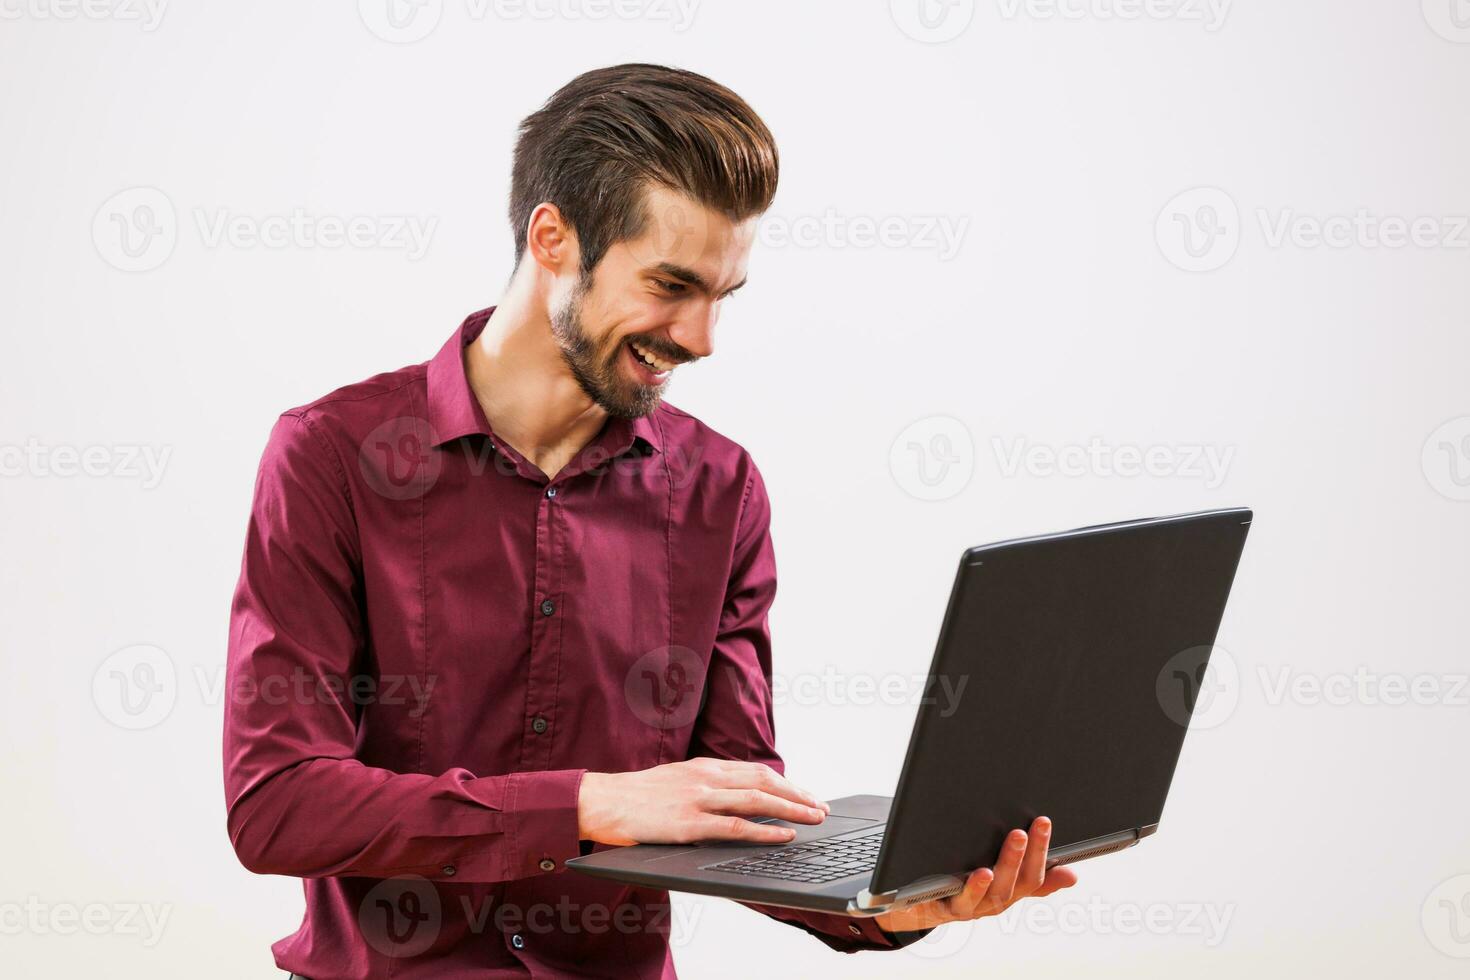 A man in a purple shirt with a laptop photo